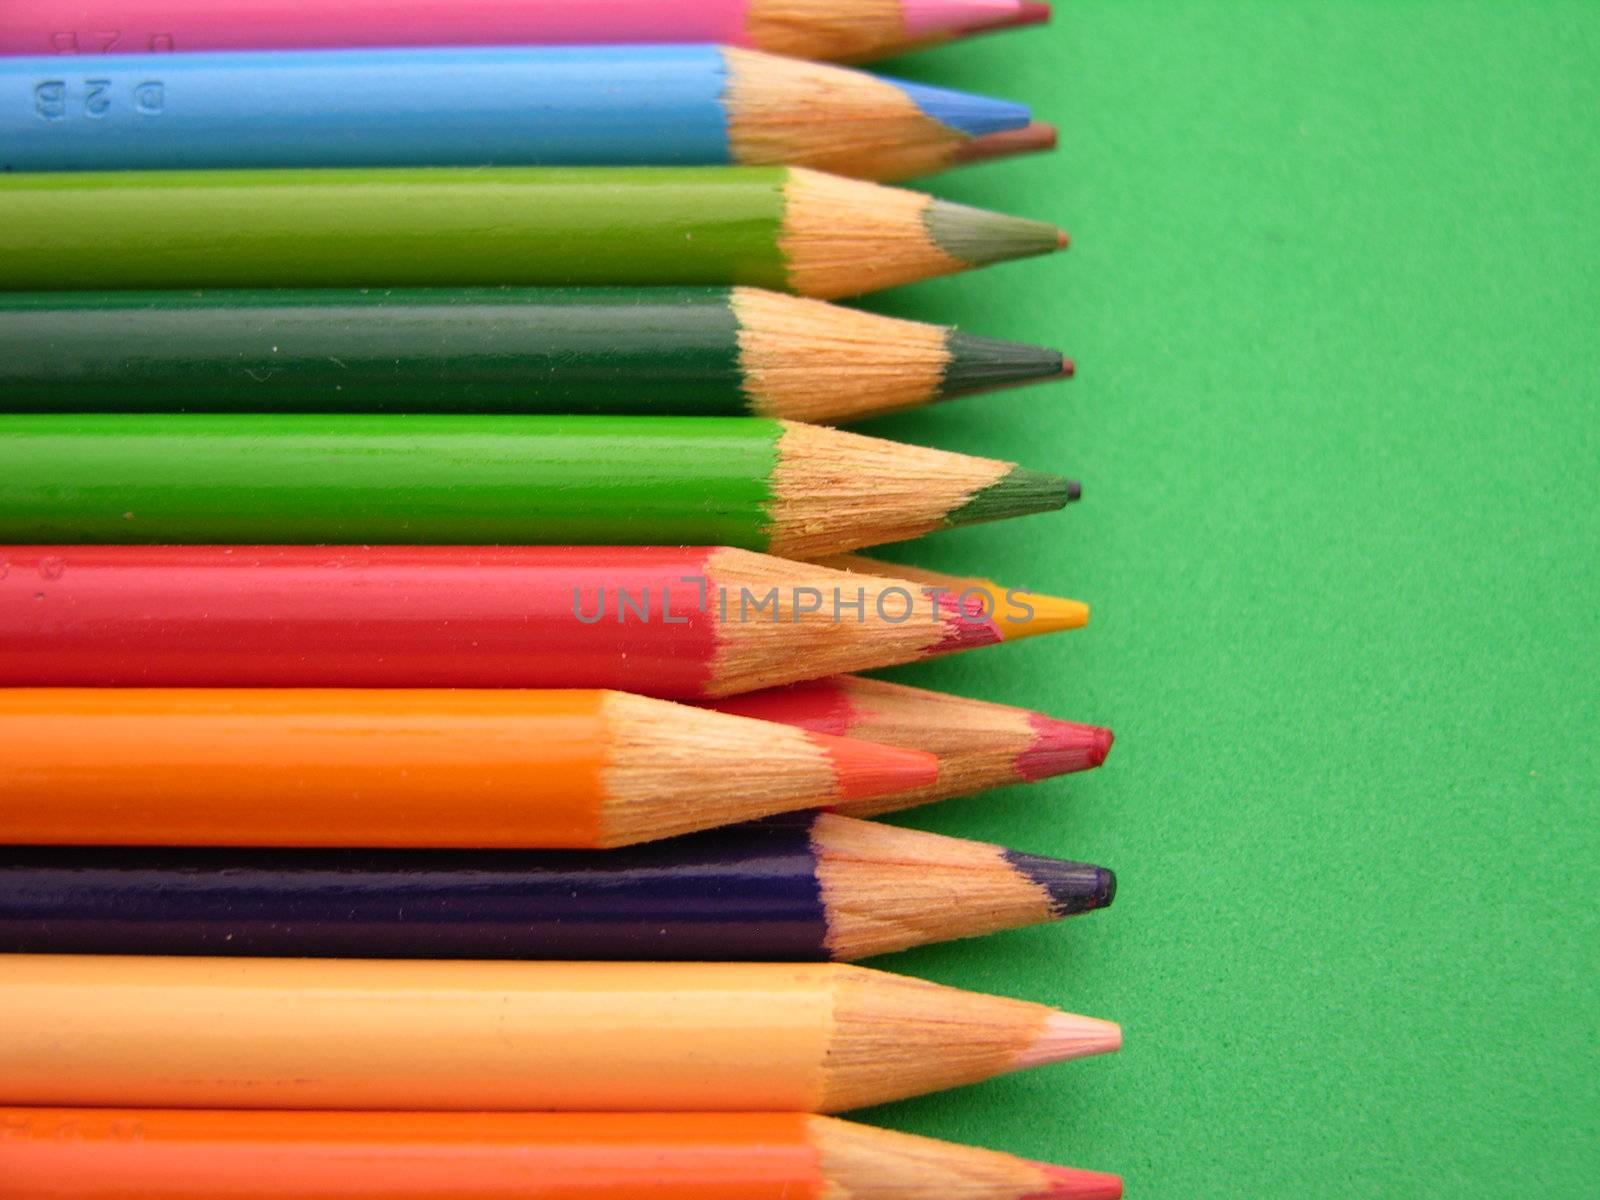 colored pencils ready for use in school or the office